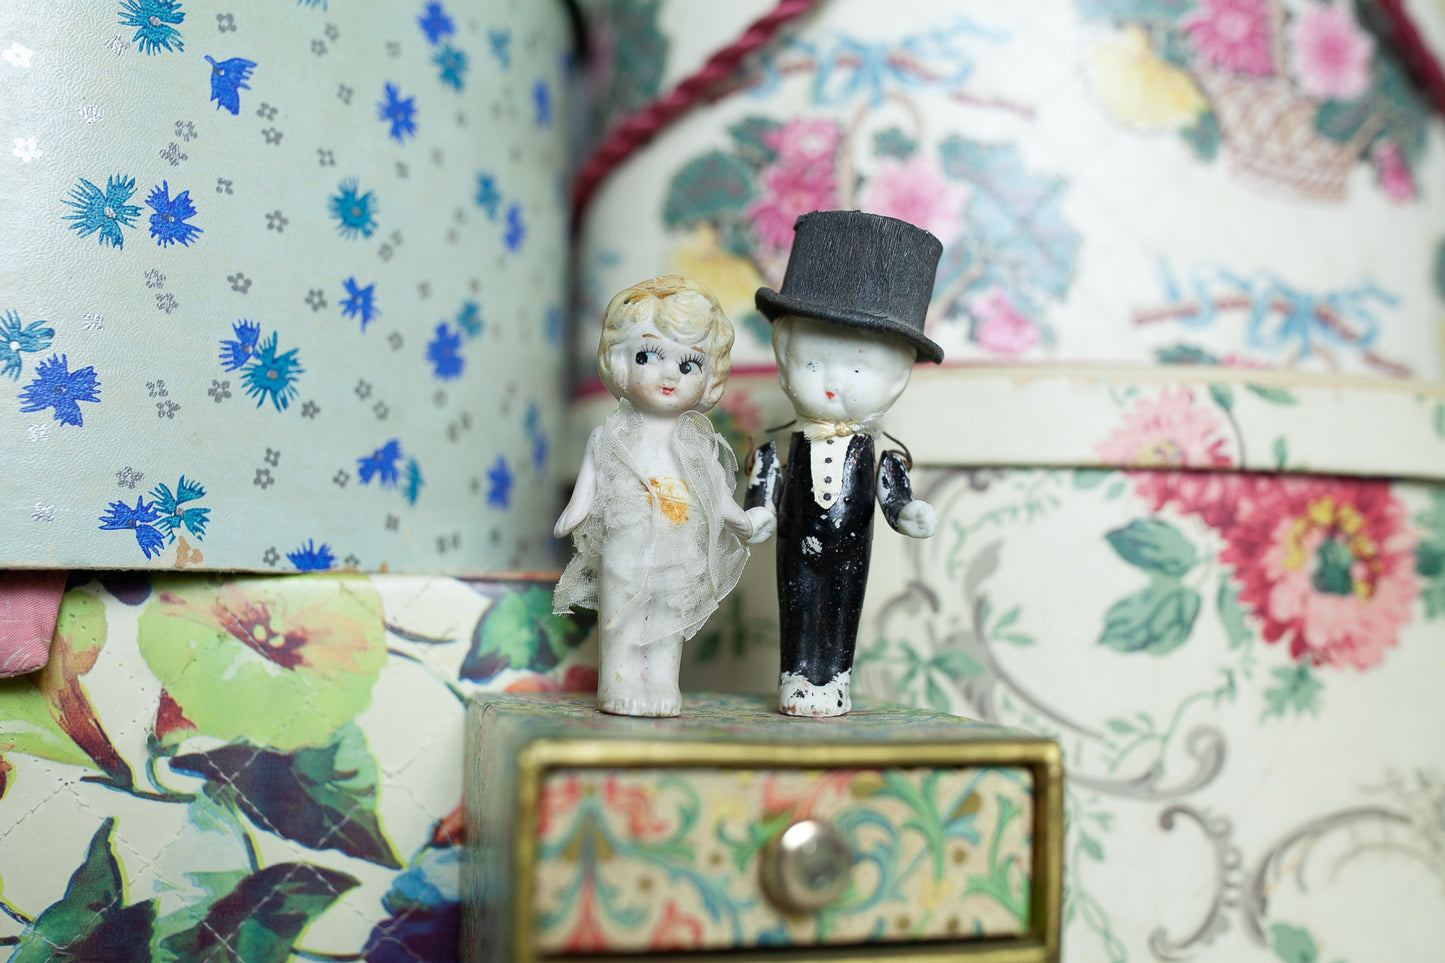 Bisque Bride and Groom - All Bisque Doll - Frozen Charlotte